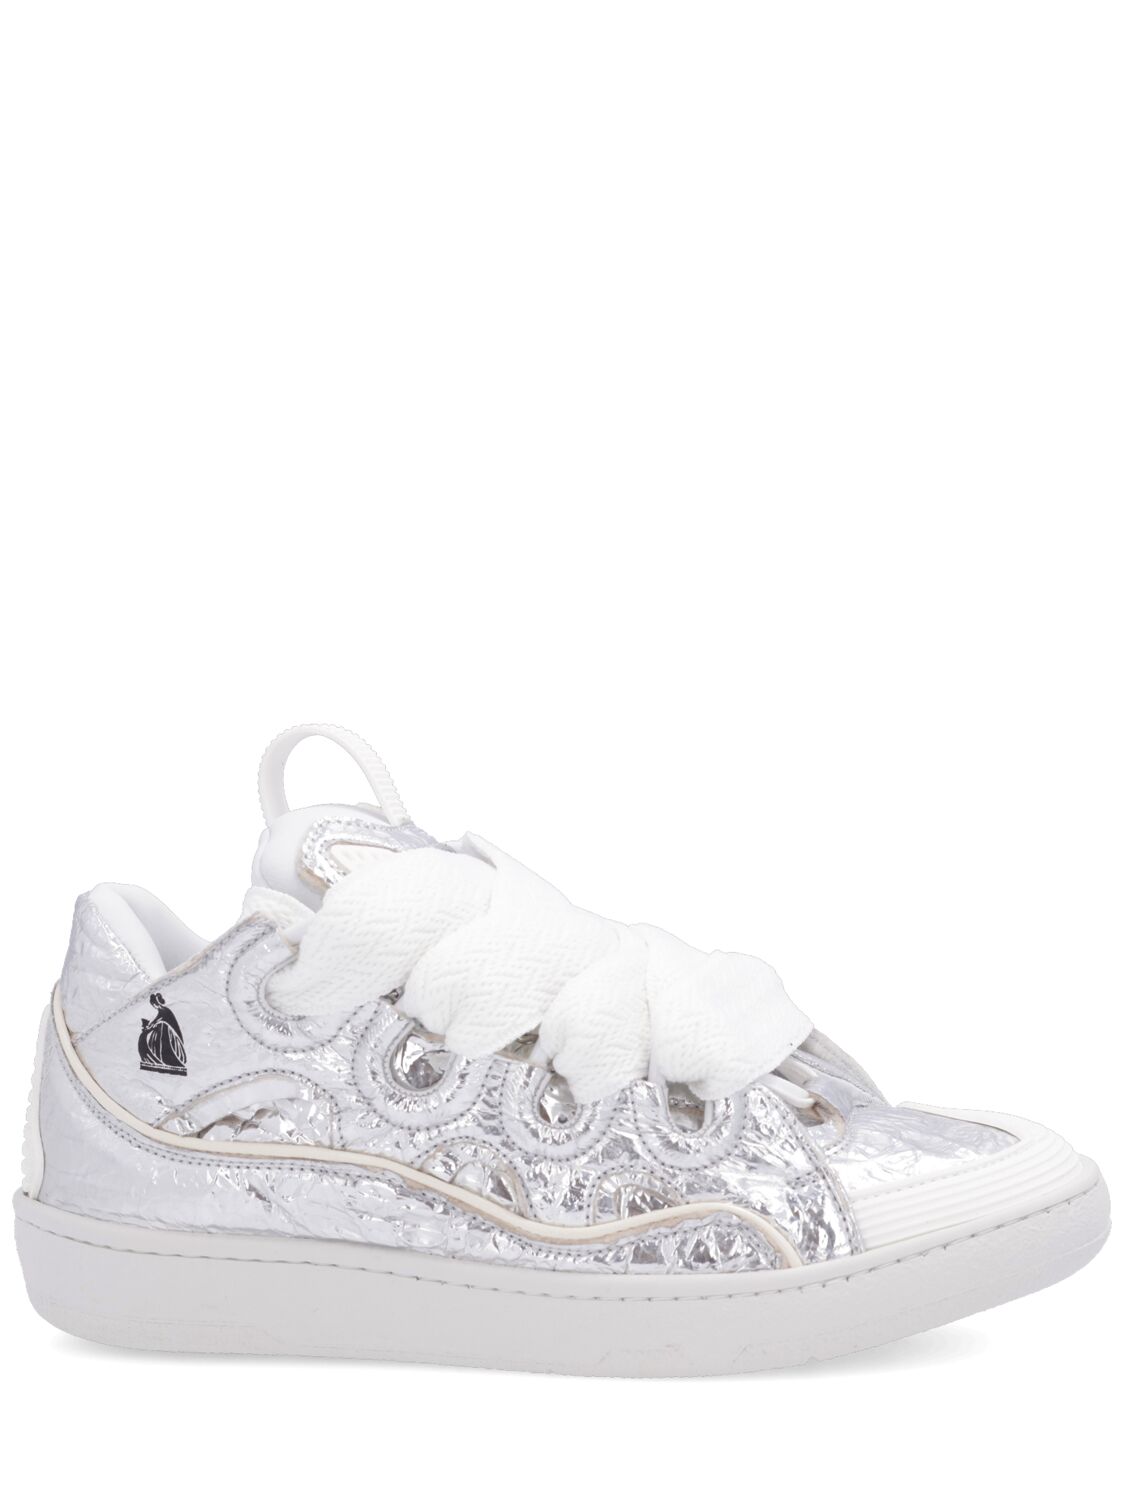 Image of Curb Metallic Leather & Mesh Sneakers